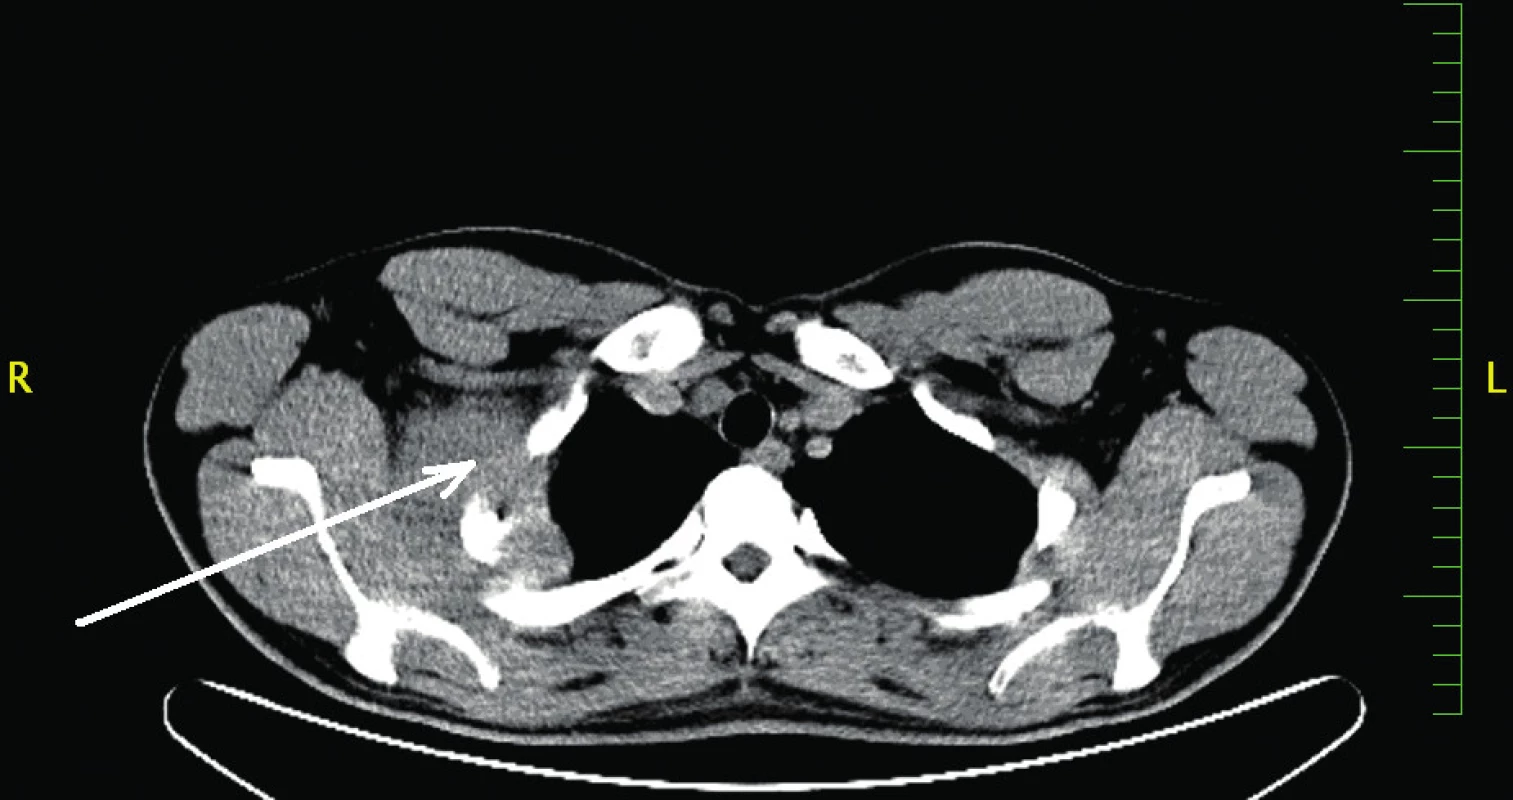 CT plic, kazuistika 2
Fig. 1: Thoracic CT scan, case report 2